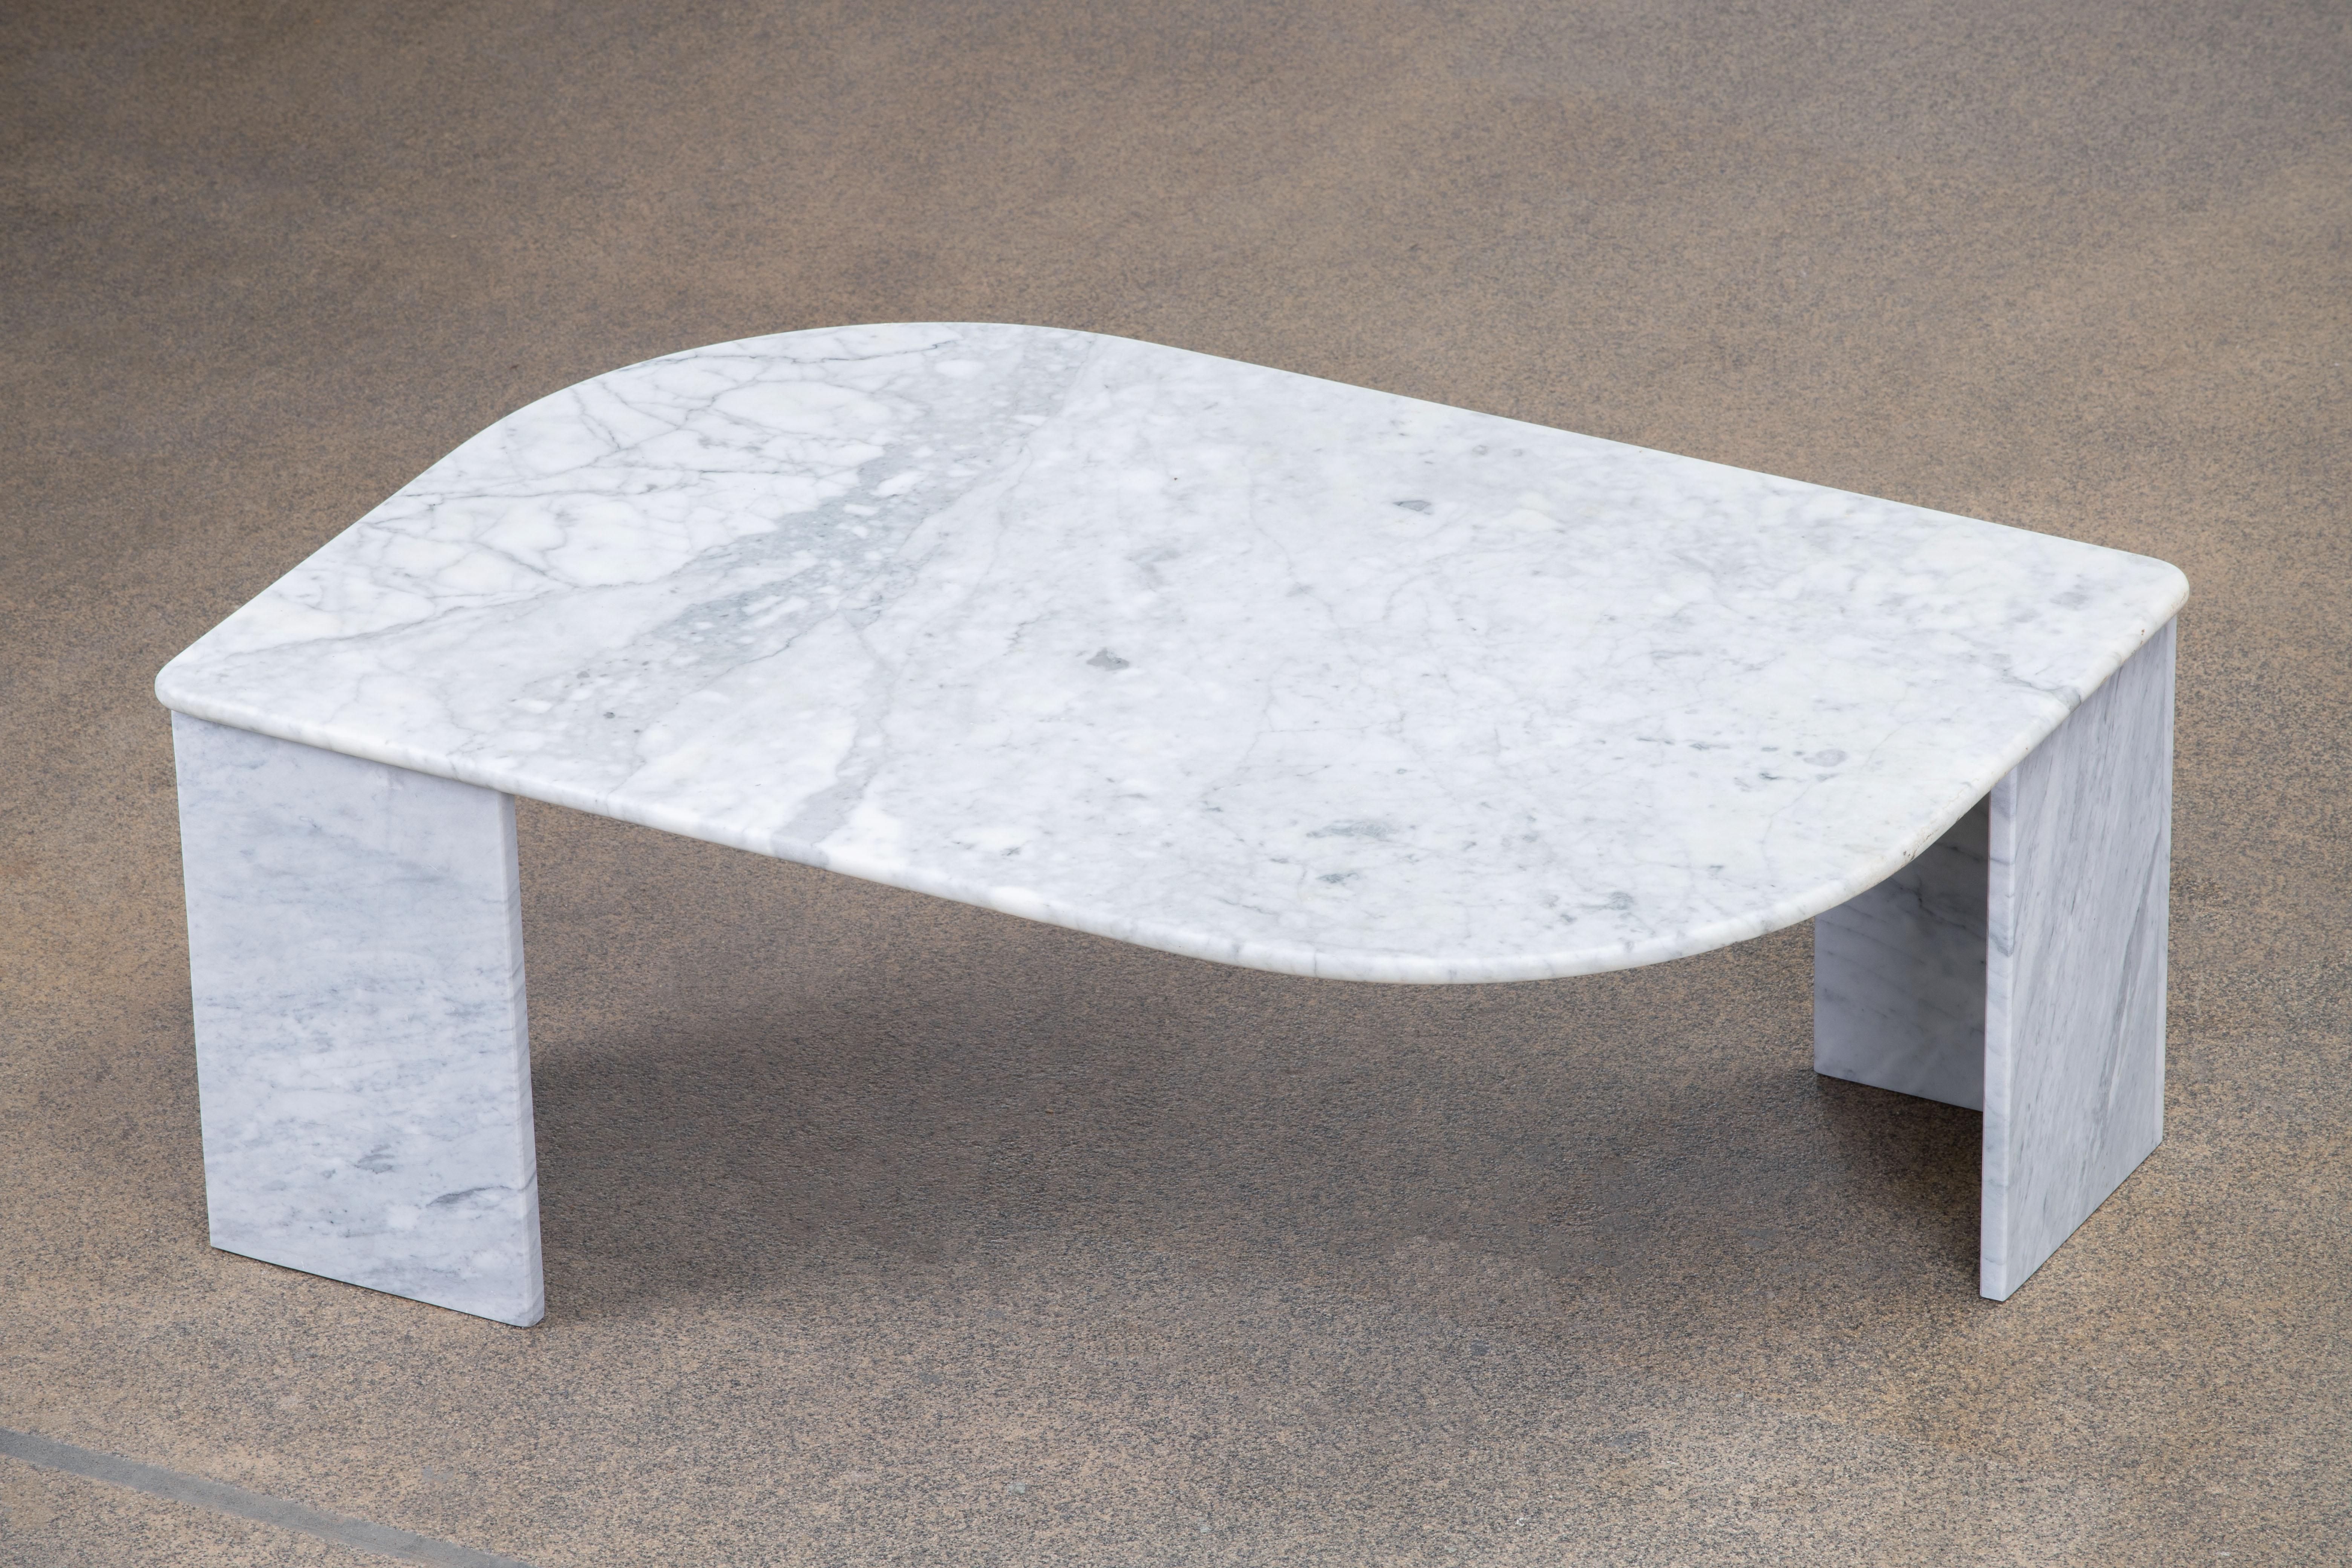 Beautiful grey and white marble table.

The heavy eye-shaped top rests on two marble V blocks.